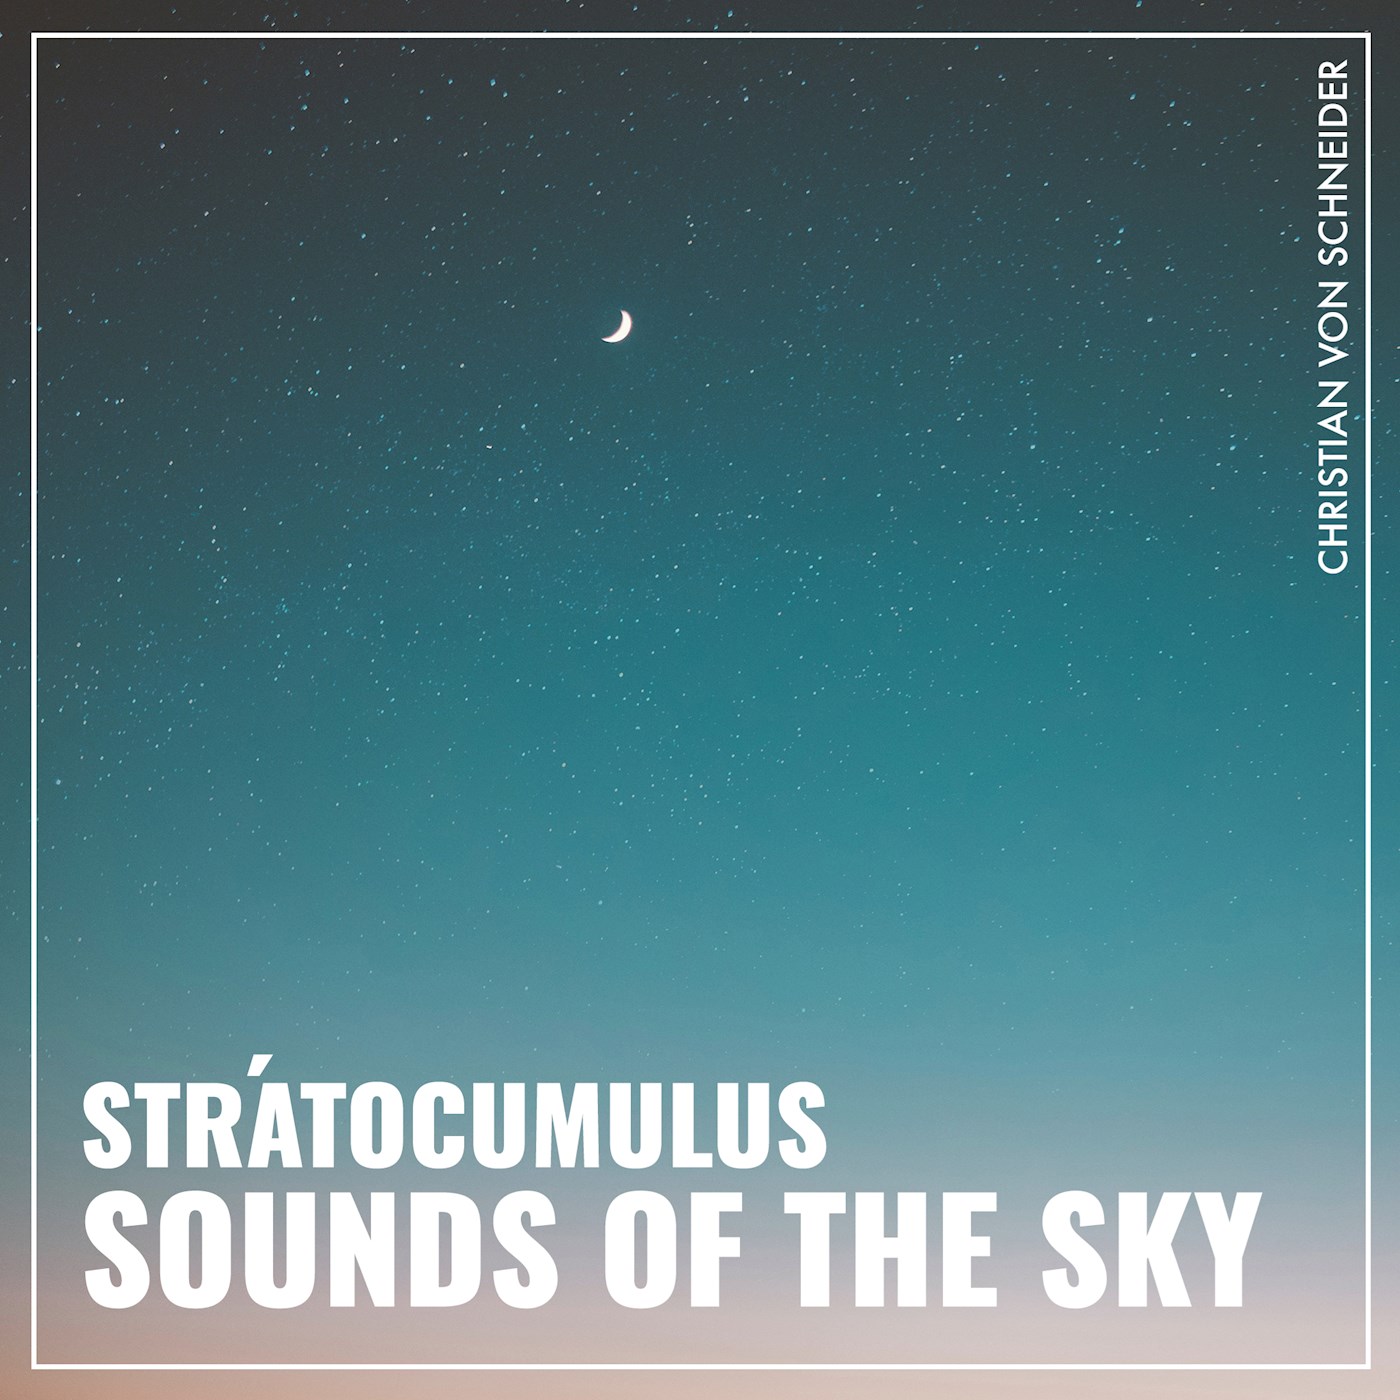 Stratocumulus - Sounds of the sky